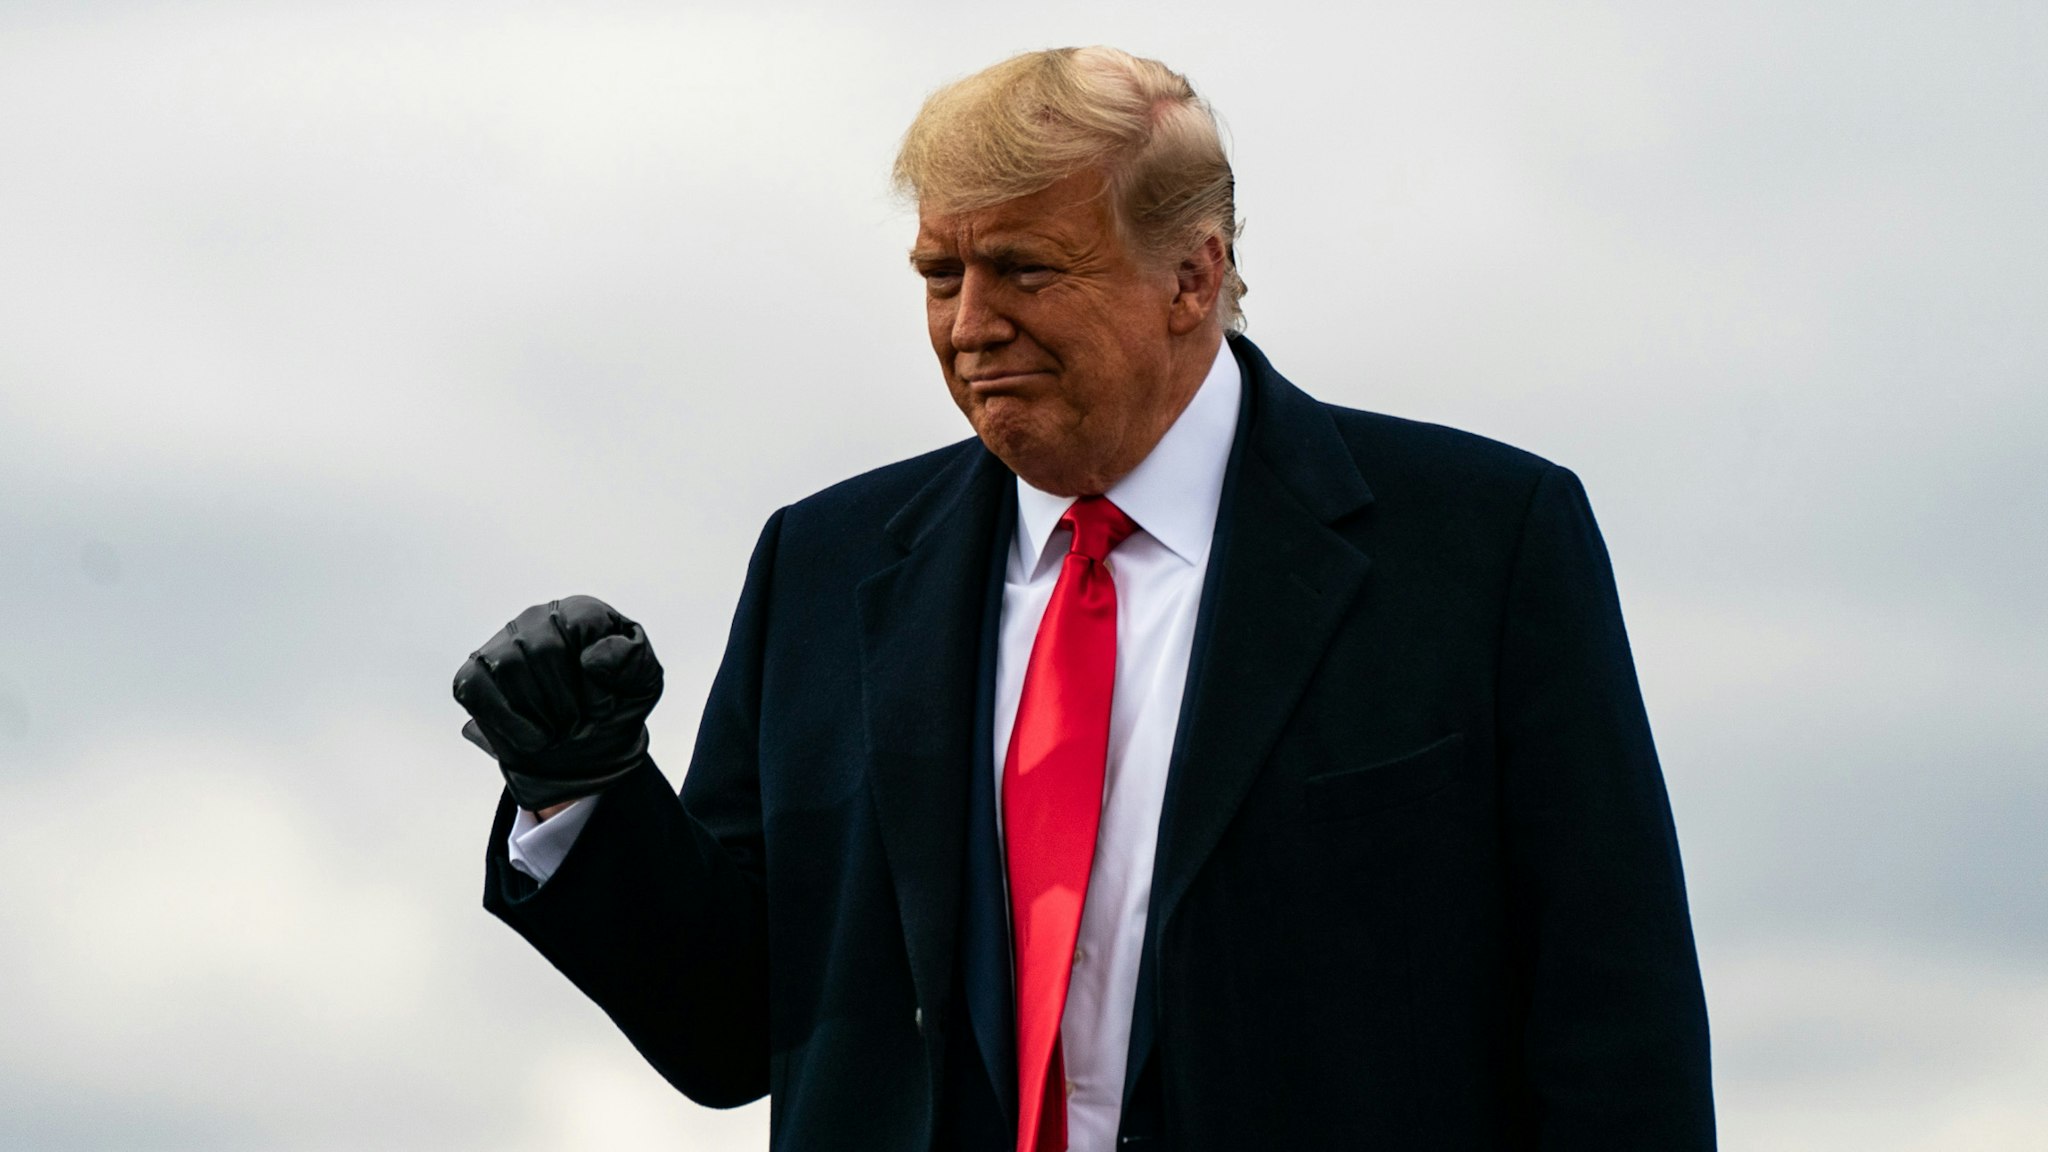 WATERFORD TOWNSHIP, MI - OCTOBER 30: President Donald J. Trump arrives to speak to supporters during a Make America Great Again Victory Rally in Waterford Township, Michigan on Friday, Oct. 30, 2020.